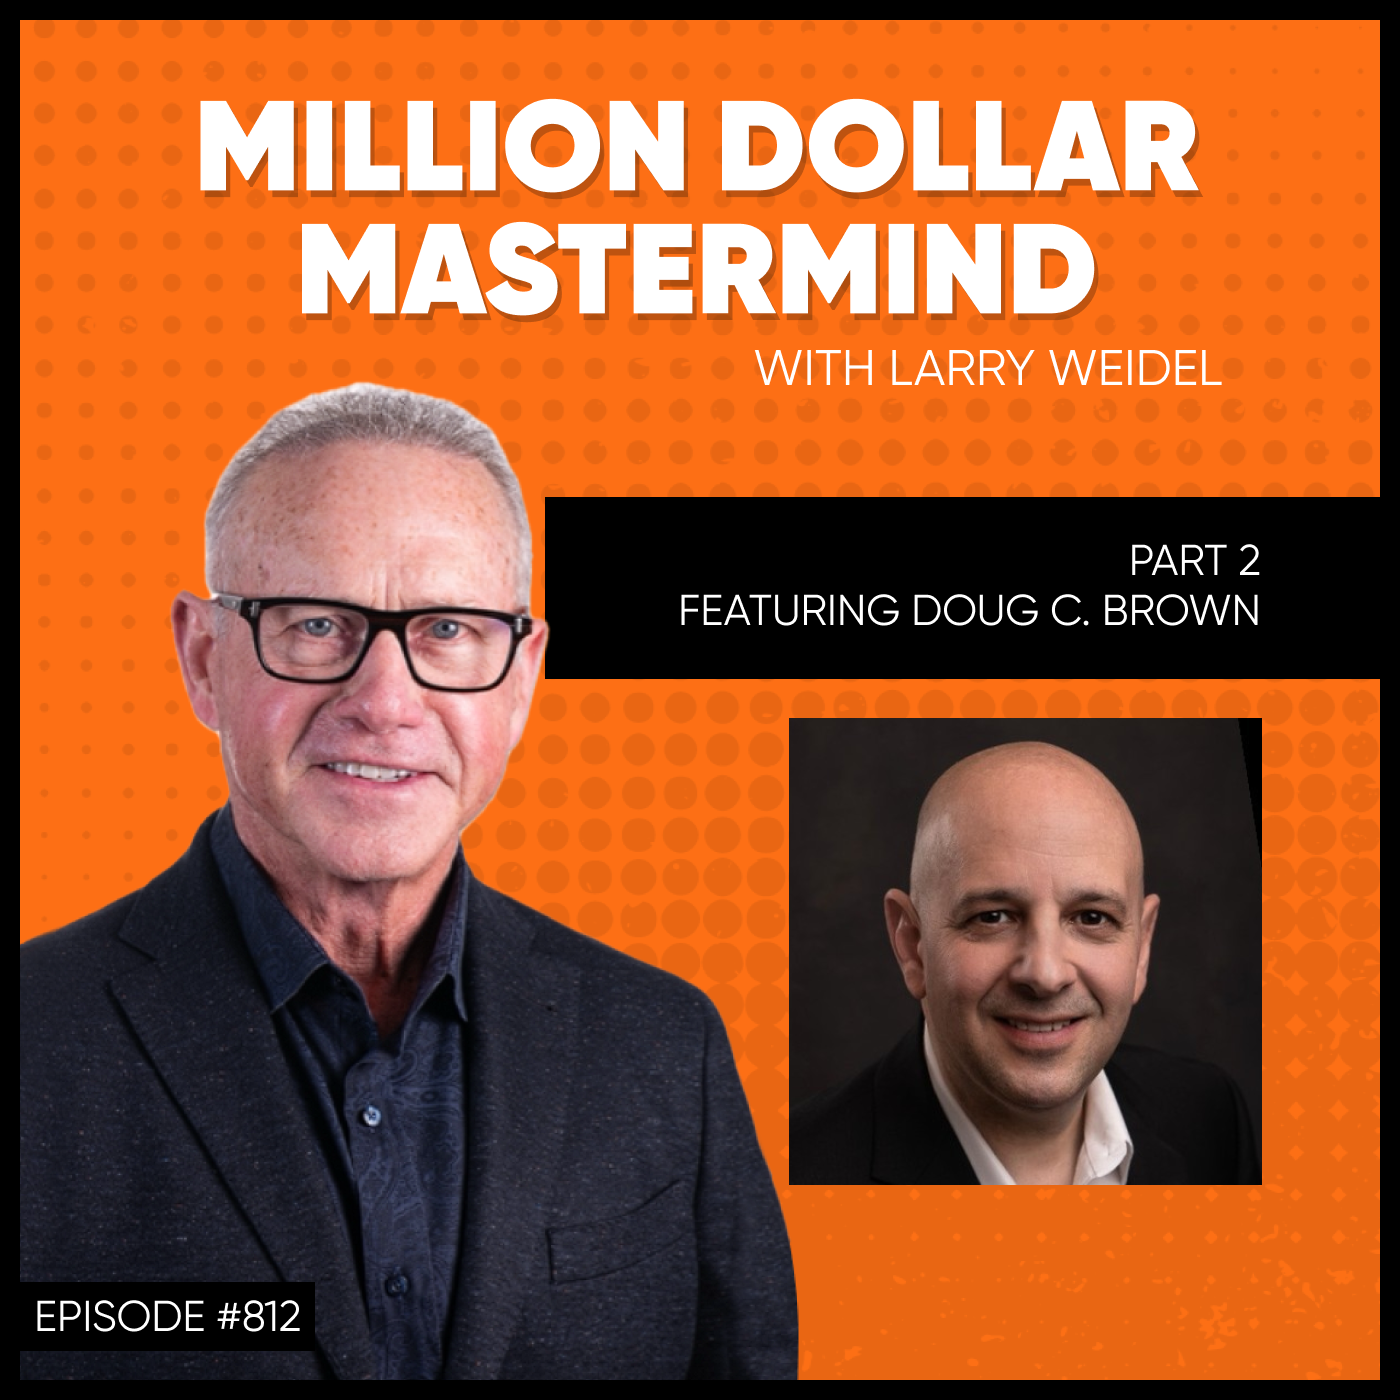 Part 2 - The Sales Strategy That Turned $58M Into $362M In Just Two Years